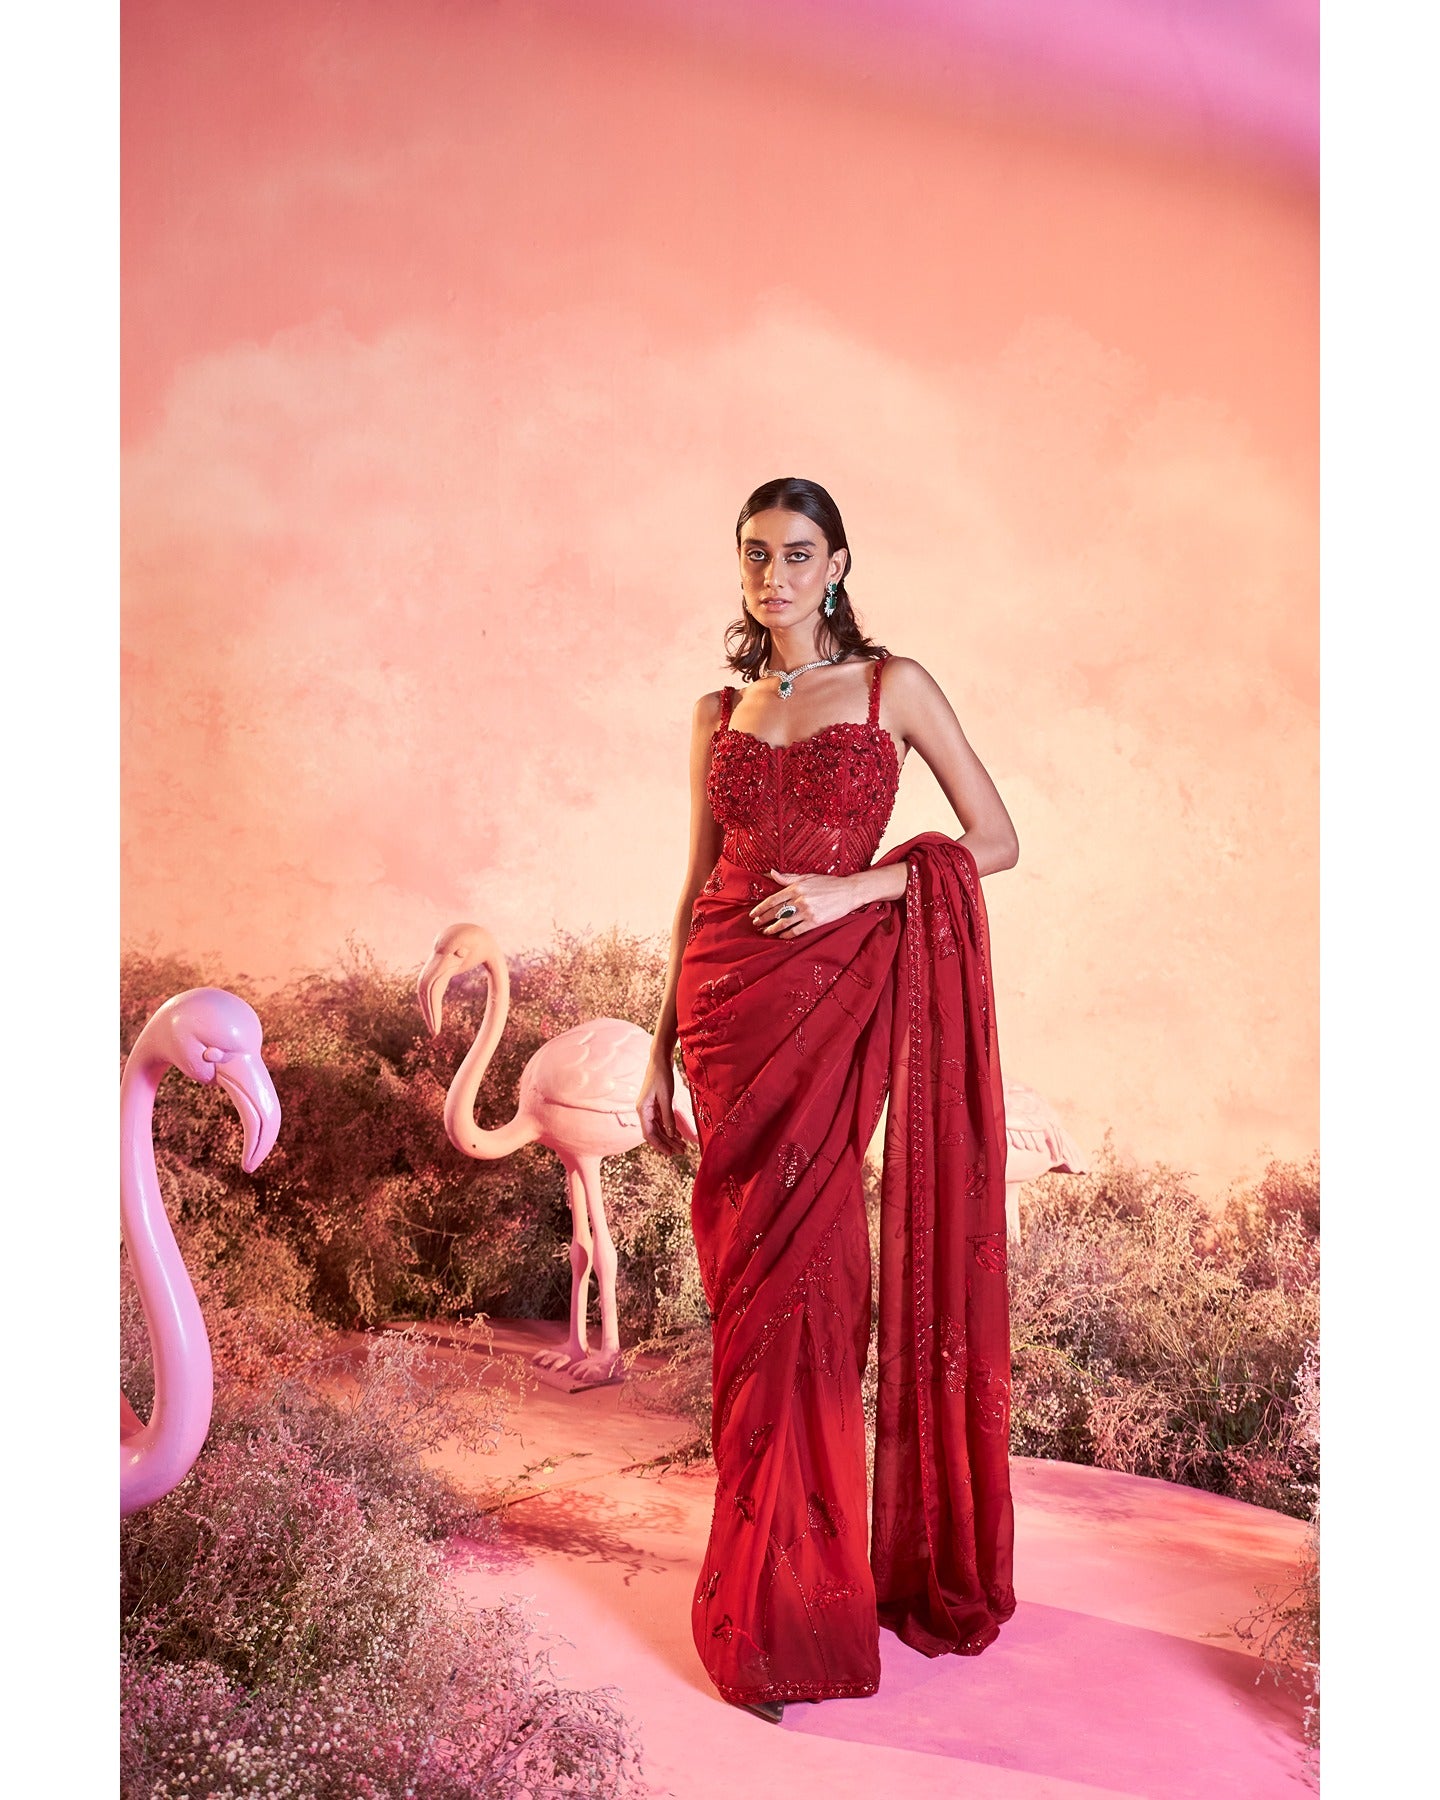 Crimson Chic: A vision in red, where hand-embroidery weaves a story of timeless elegance.